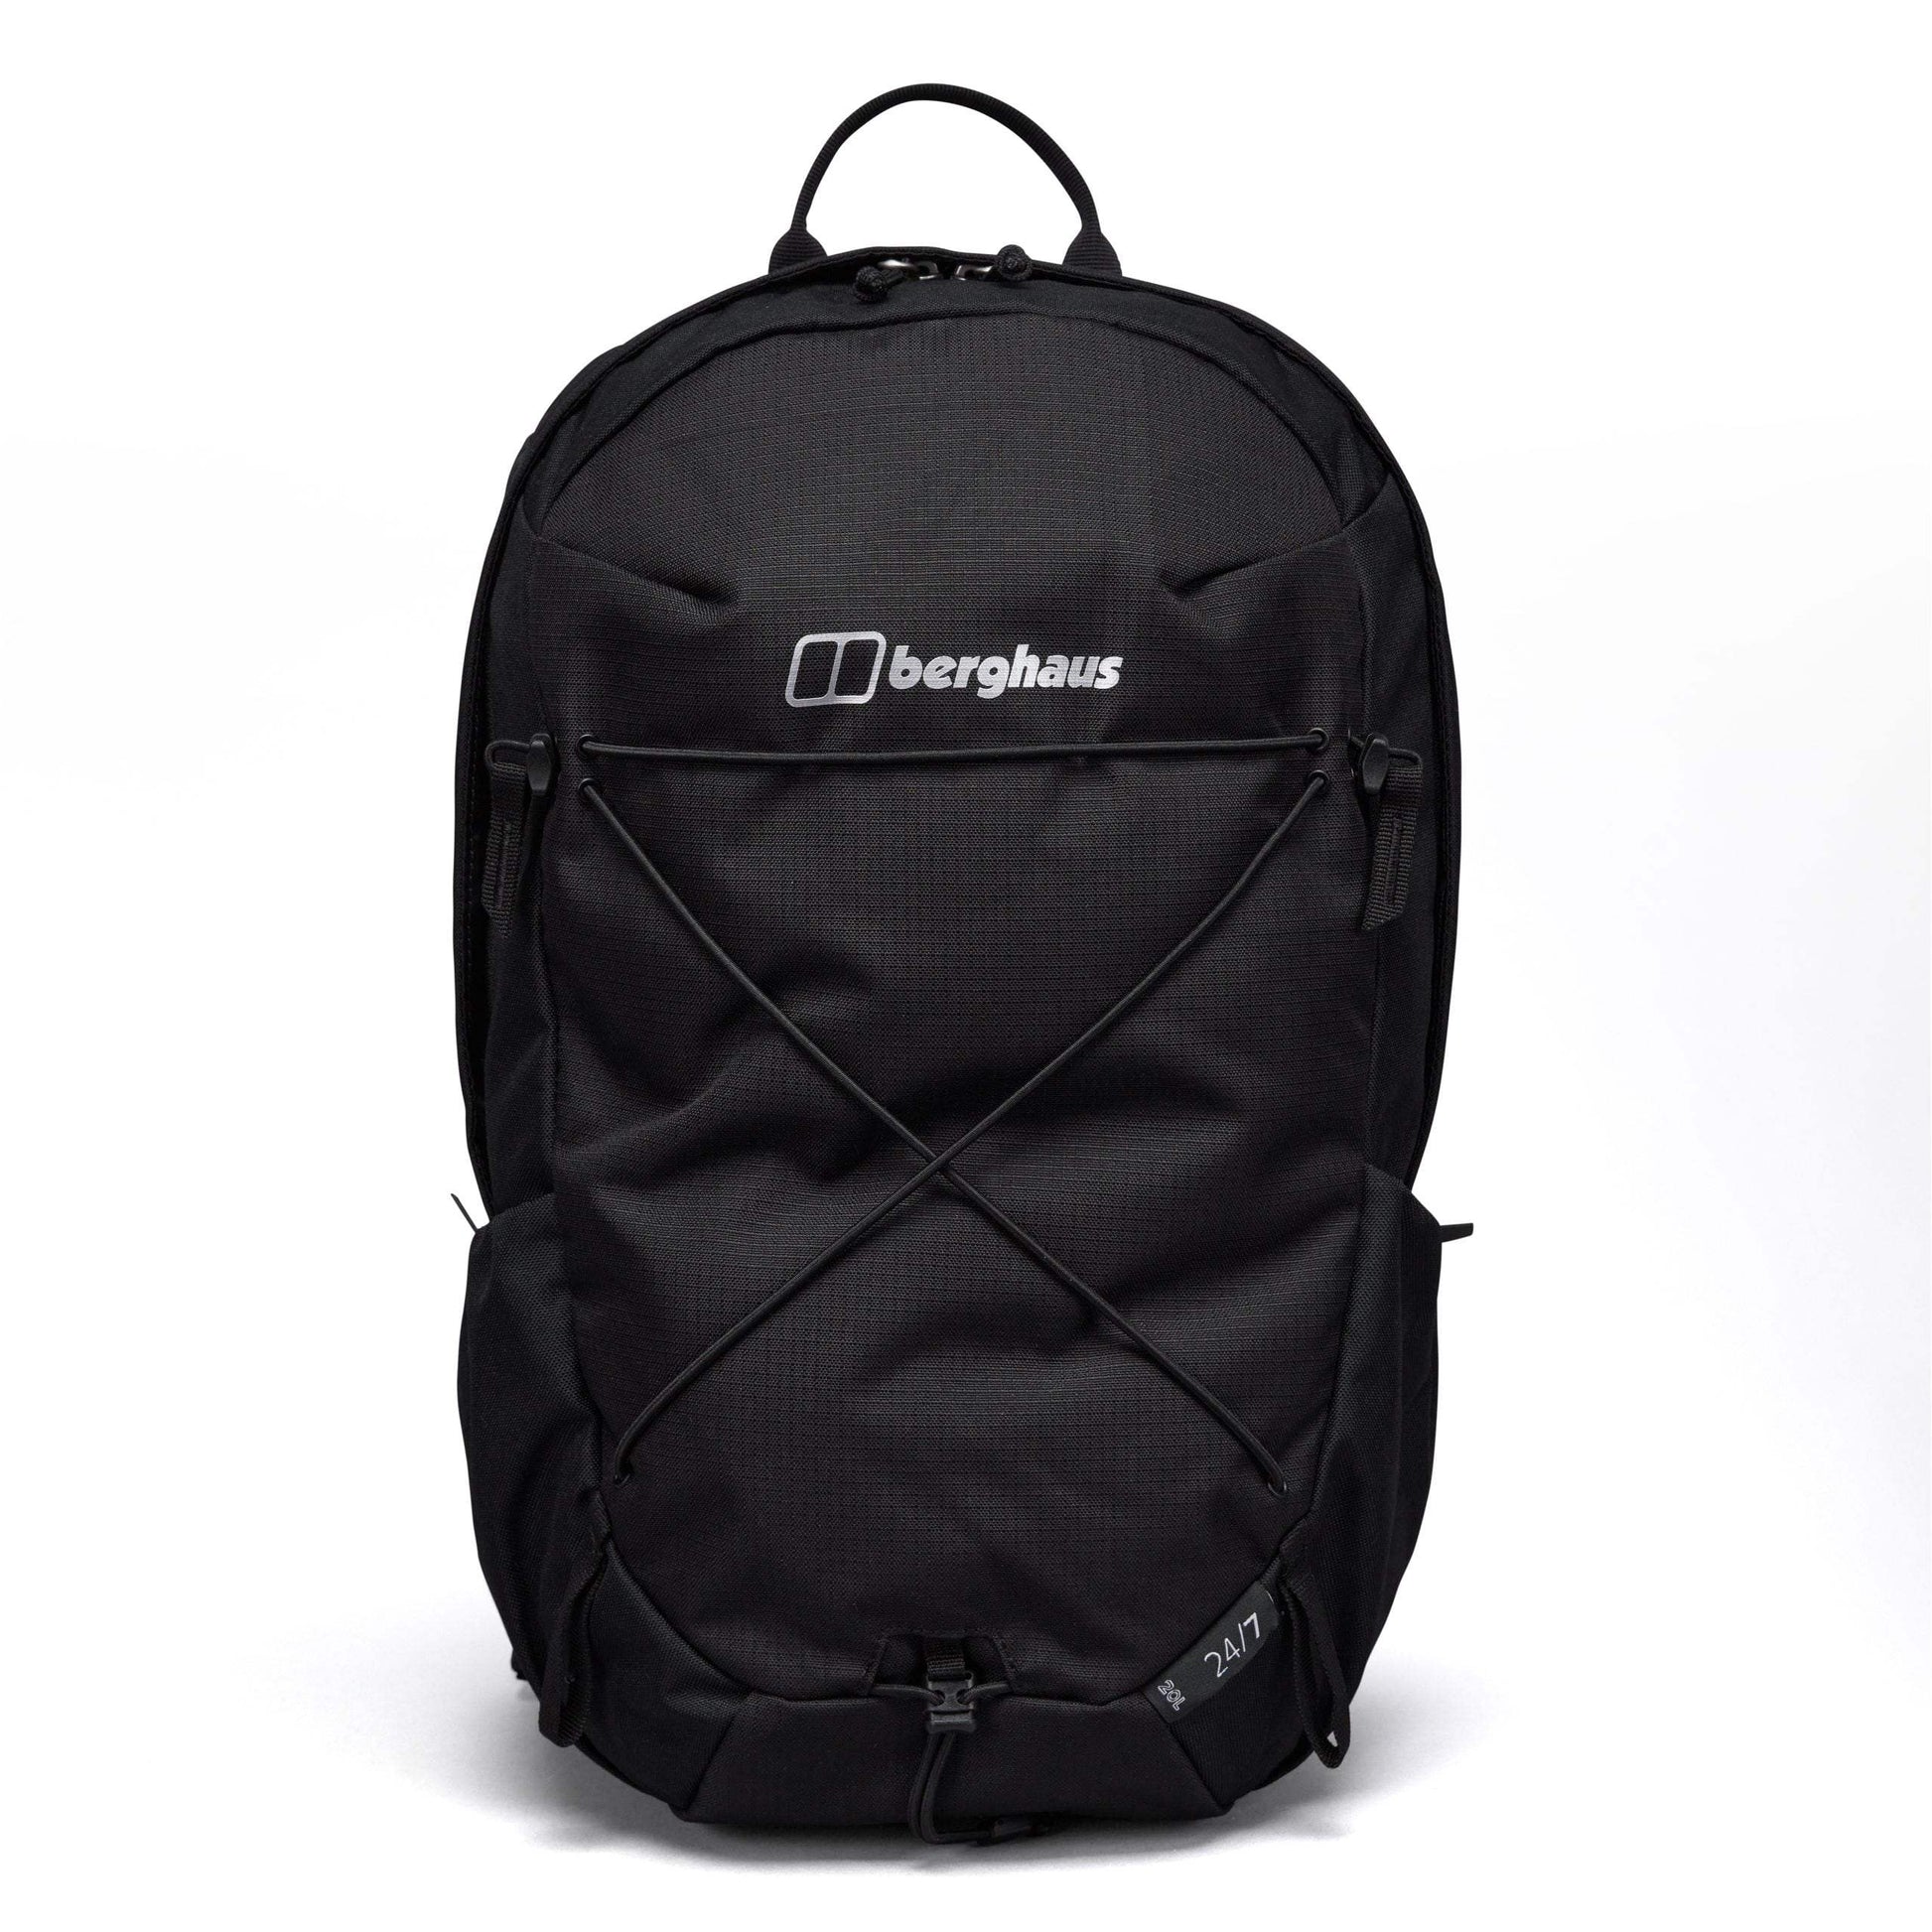 24 7 20 Rucsac by Berghaus - The Luxury Promotional Gifts Company Limited